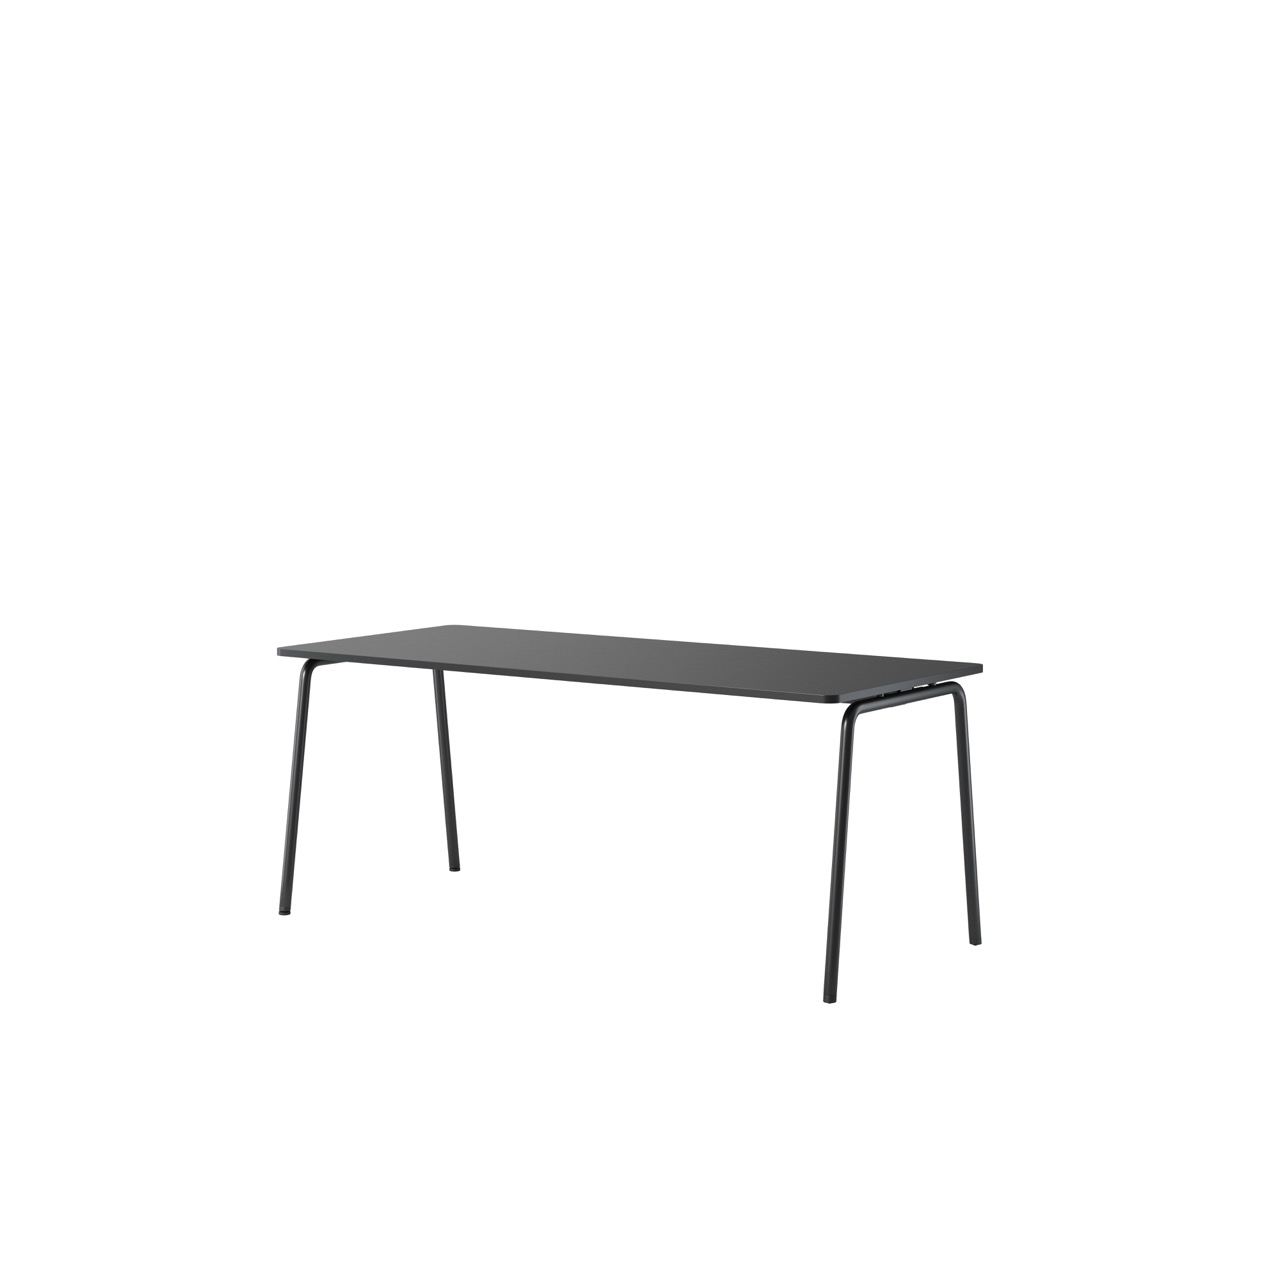 OCEE&FOUR - Tables - FourReal 74 - 180 x 80 - Angled - Packshot Image 3 Large